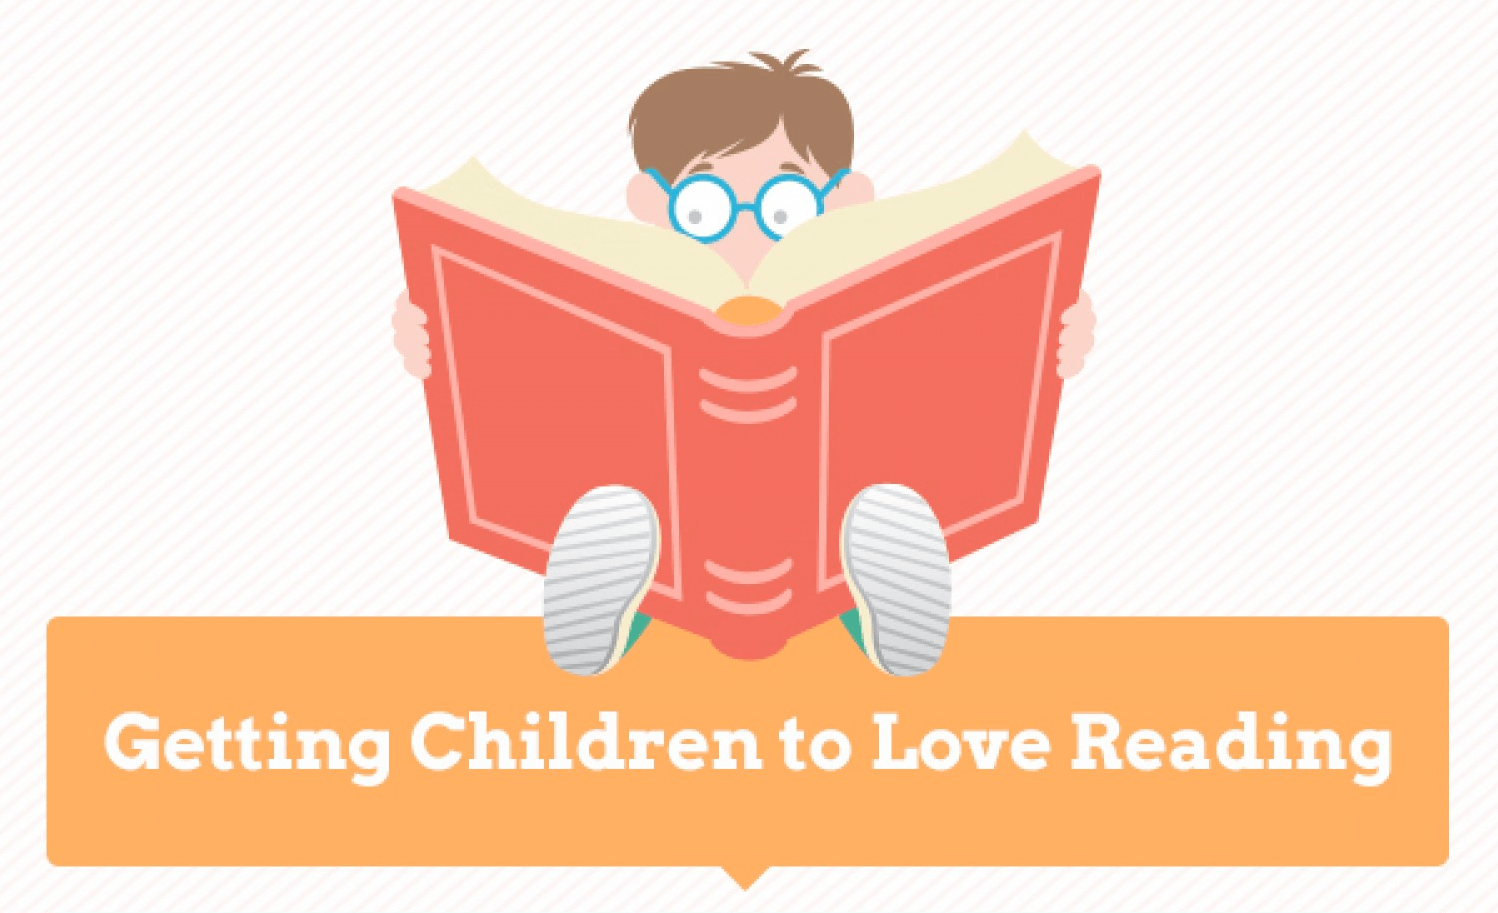 How To Get Your Kids to Love Reading